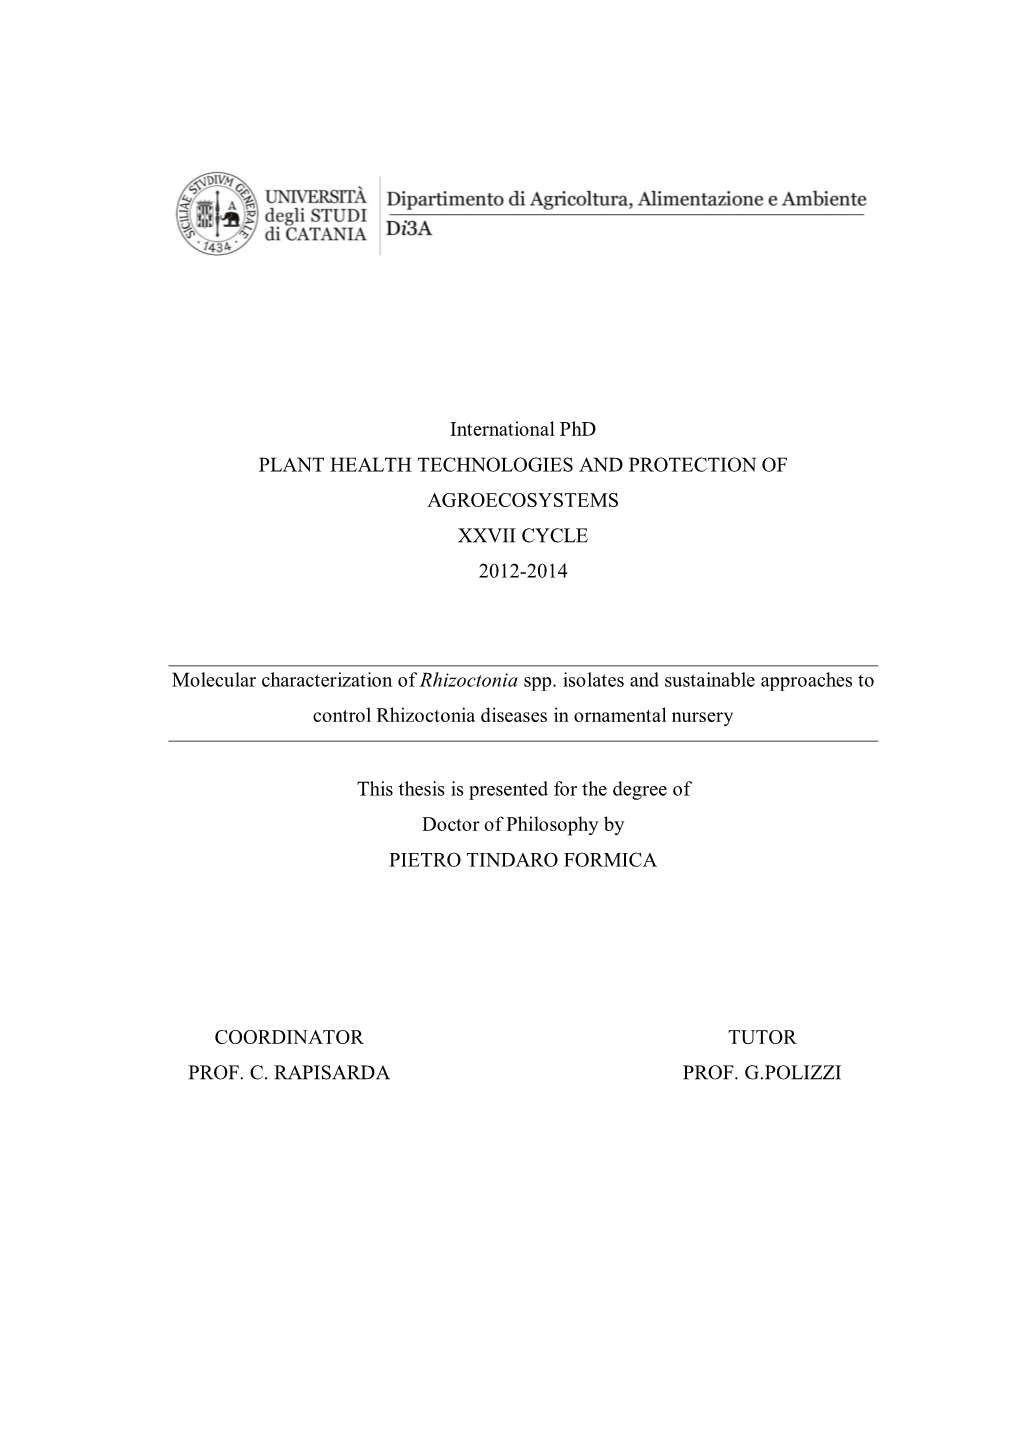 International Phd PLANT HEALTH TECHNOLOGIES and PROTECTION of AGROECOSYSTEMS XXVII CYCLE 2012-2014 Molecular Characterization Of